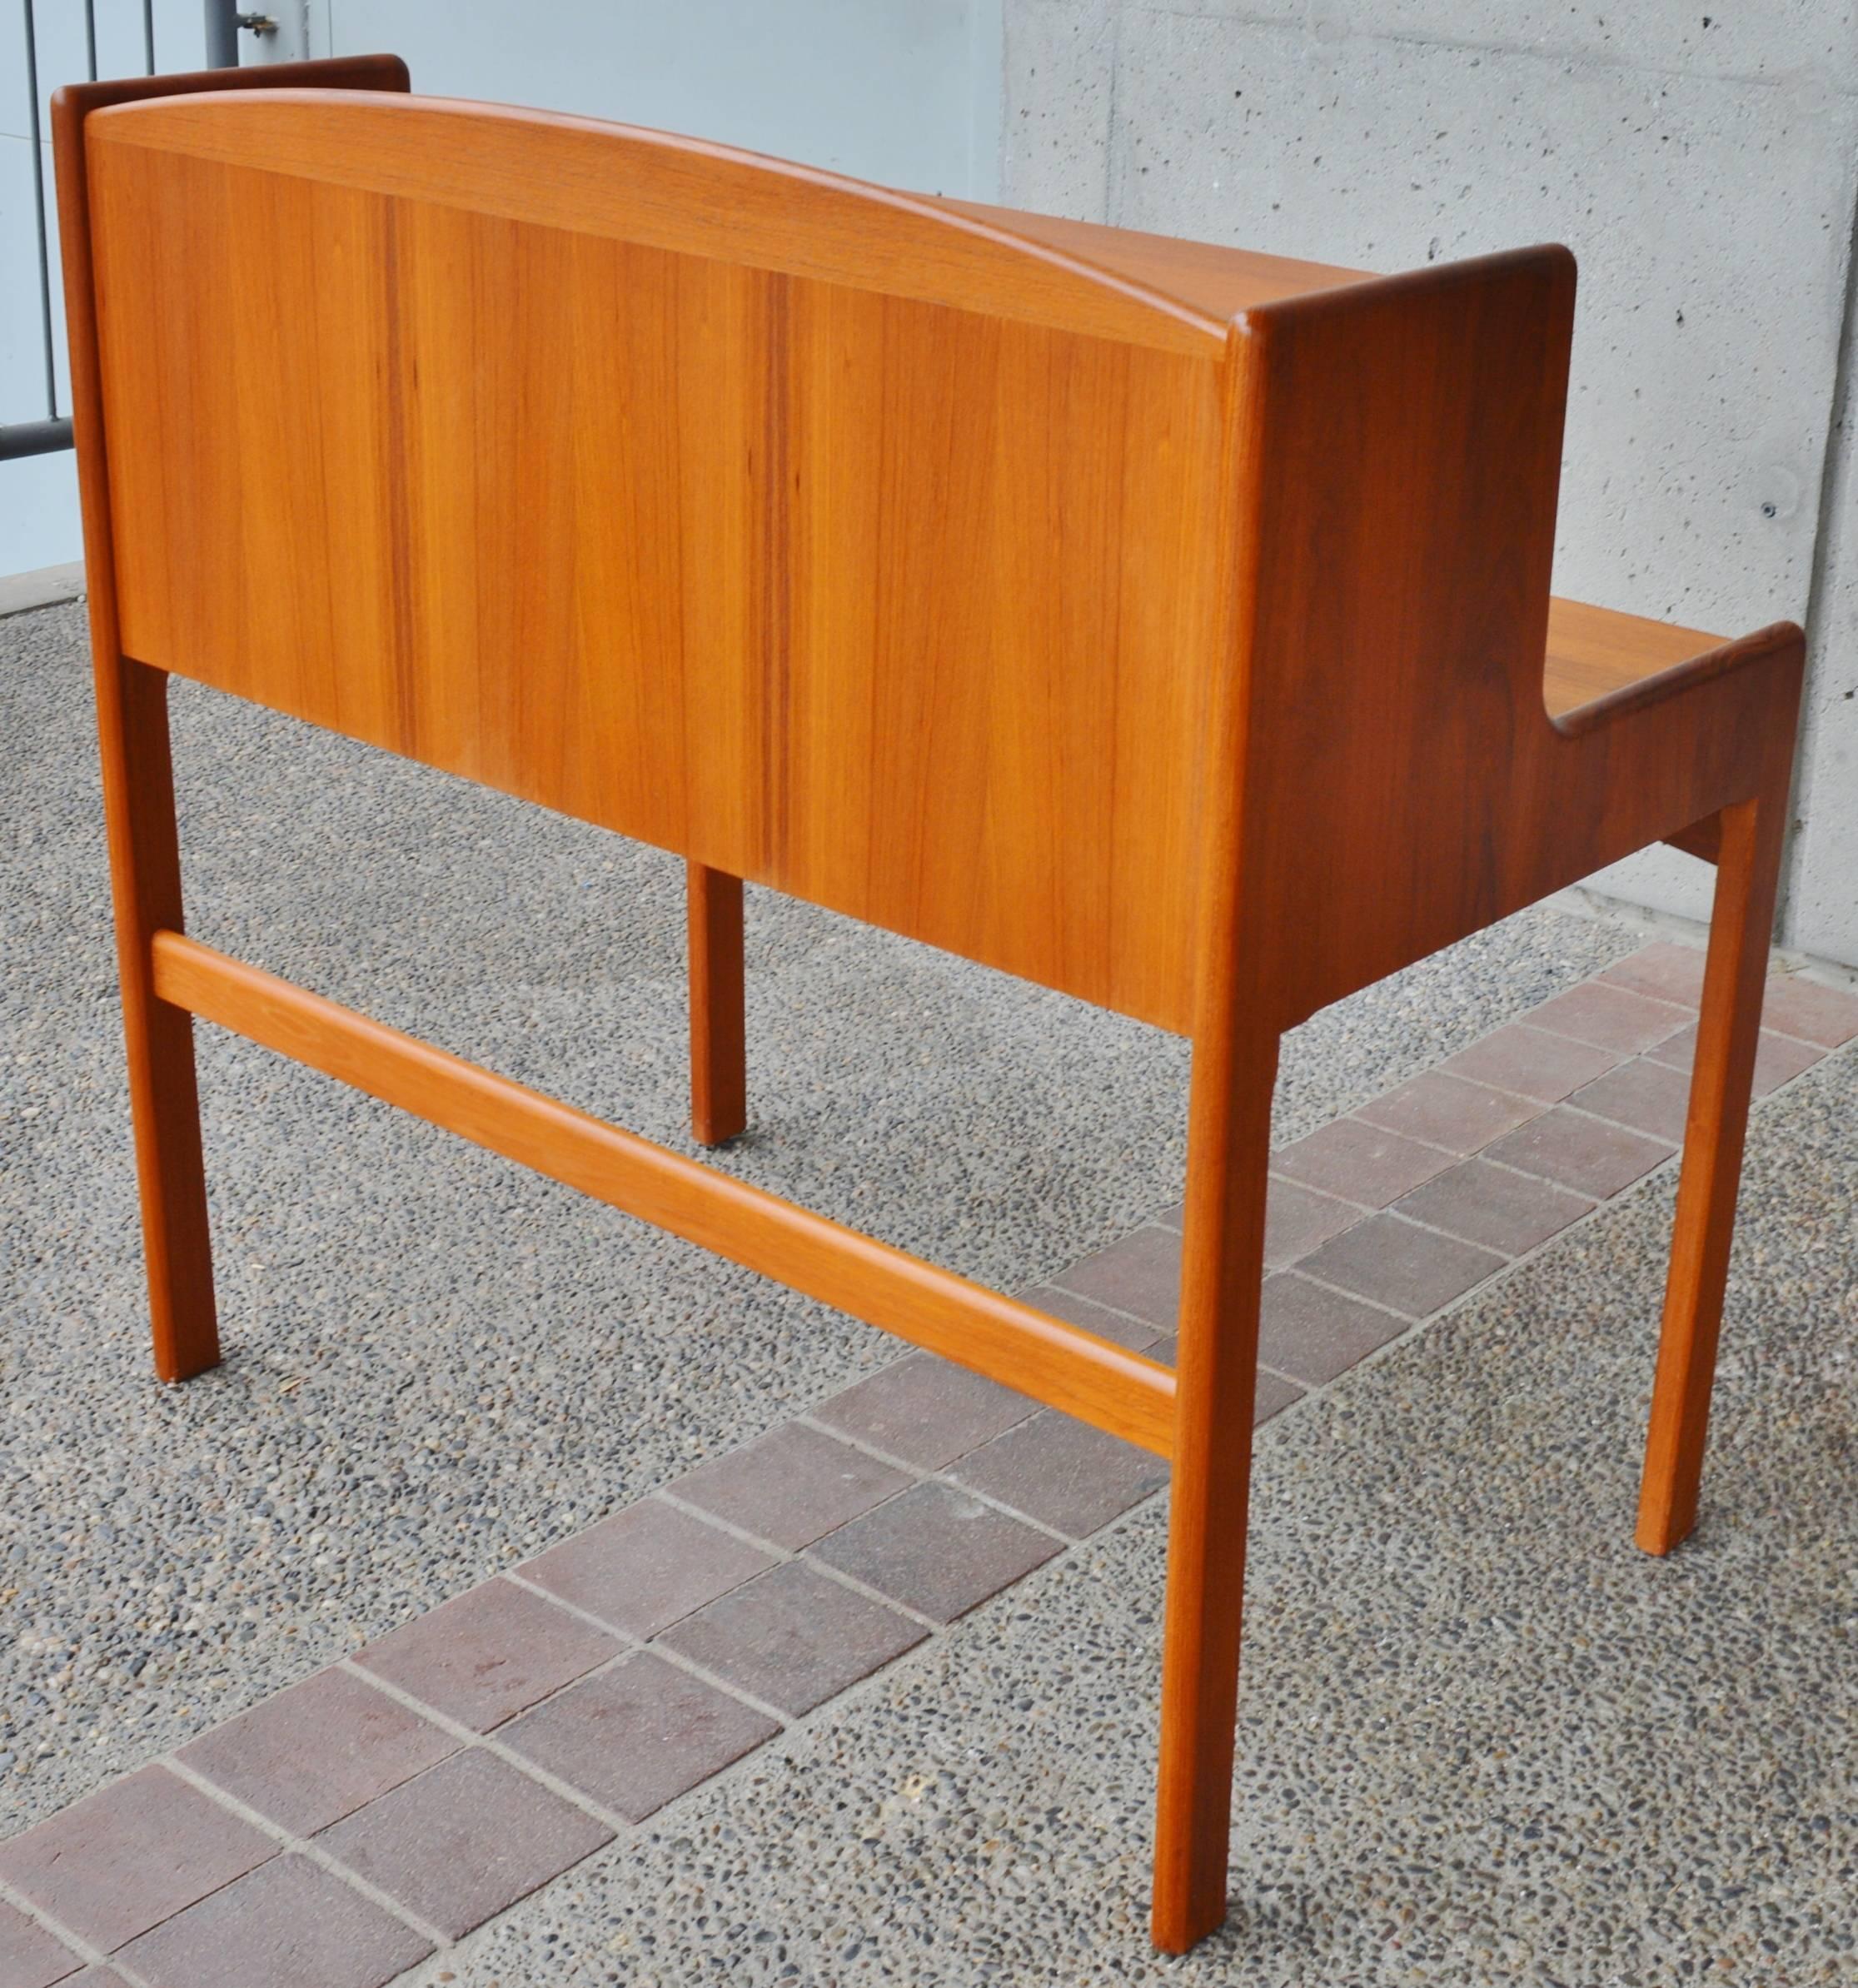 This extremely rare Danish Modern teak step-back desk / secretary is completely solid teak throughout - even the drawer bottoms! Note the photo of the sides of the desk - where you can see the grain wrap right around the edges. The drawers are solid